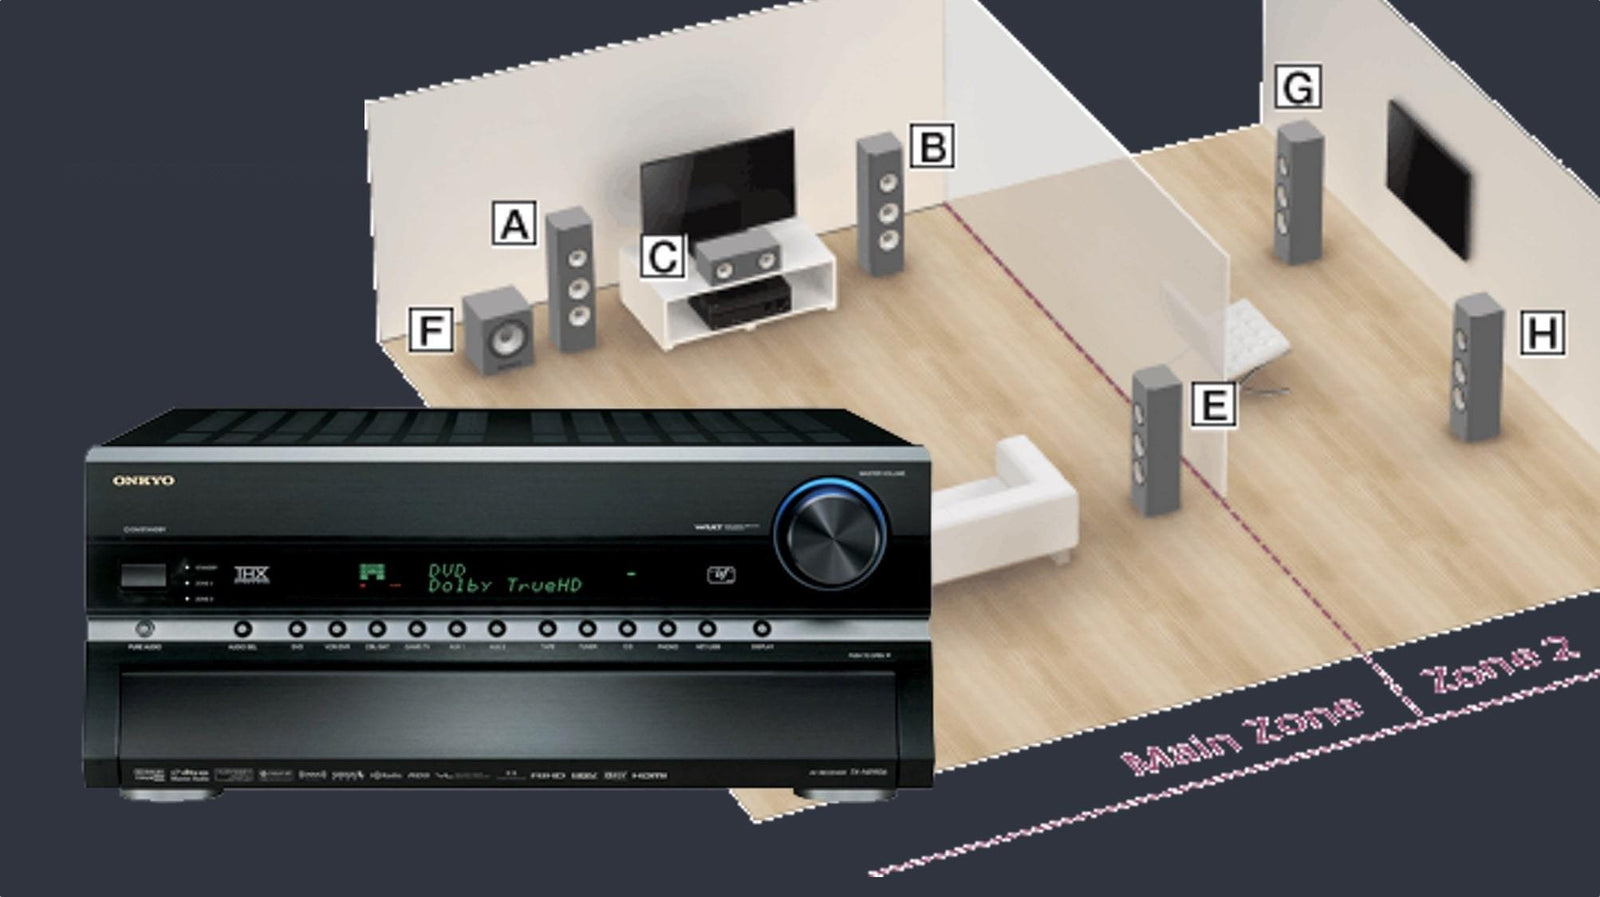 What Is "Zone 2" On My AV Receiver & How Does It Work?